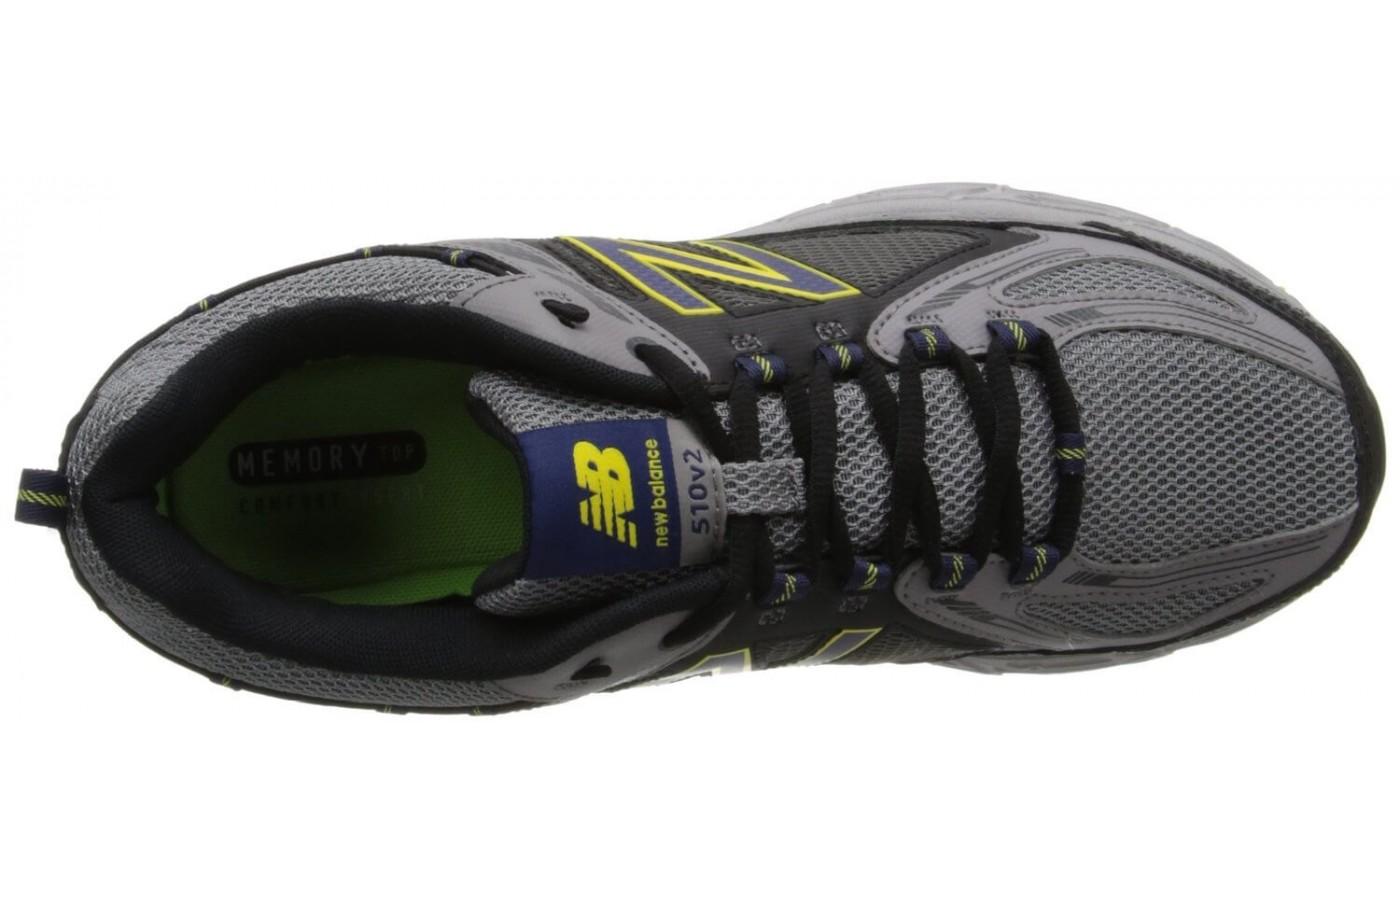 The New Balance MT510 has a PU sock liner to provide a tight fit.